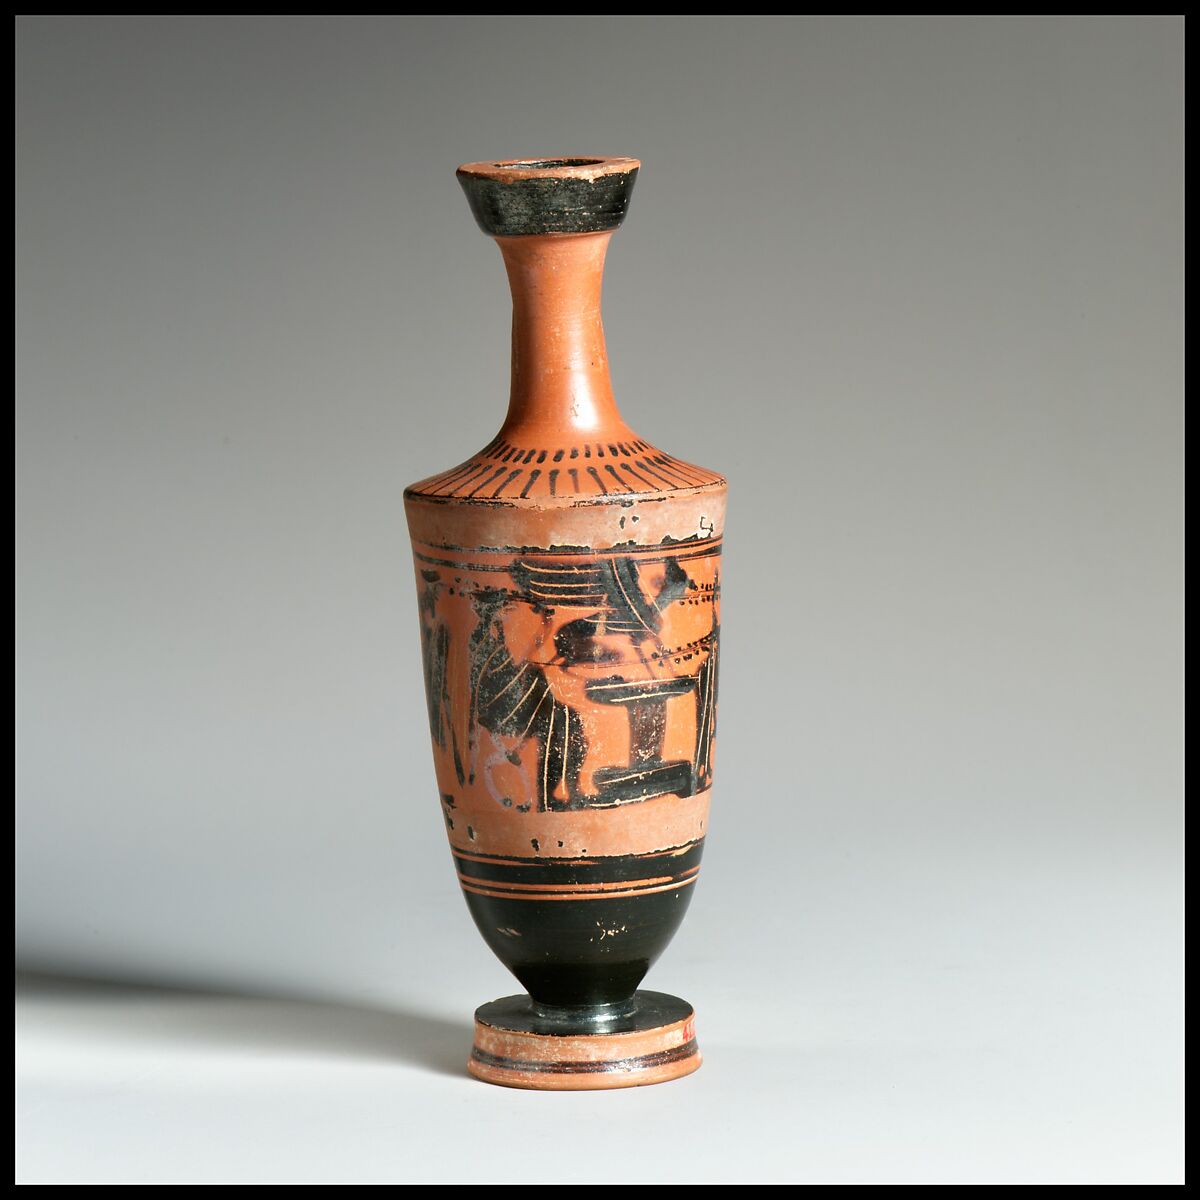 Lekythos, Attributed to the manner of the Haimon Painter, Terracotta, Greek, Attic 